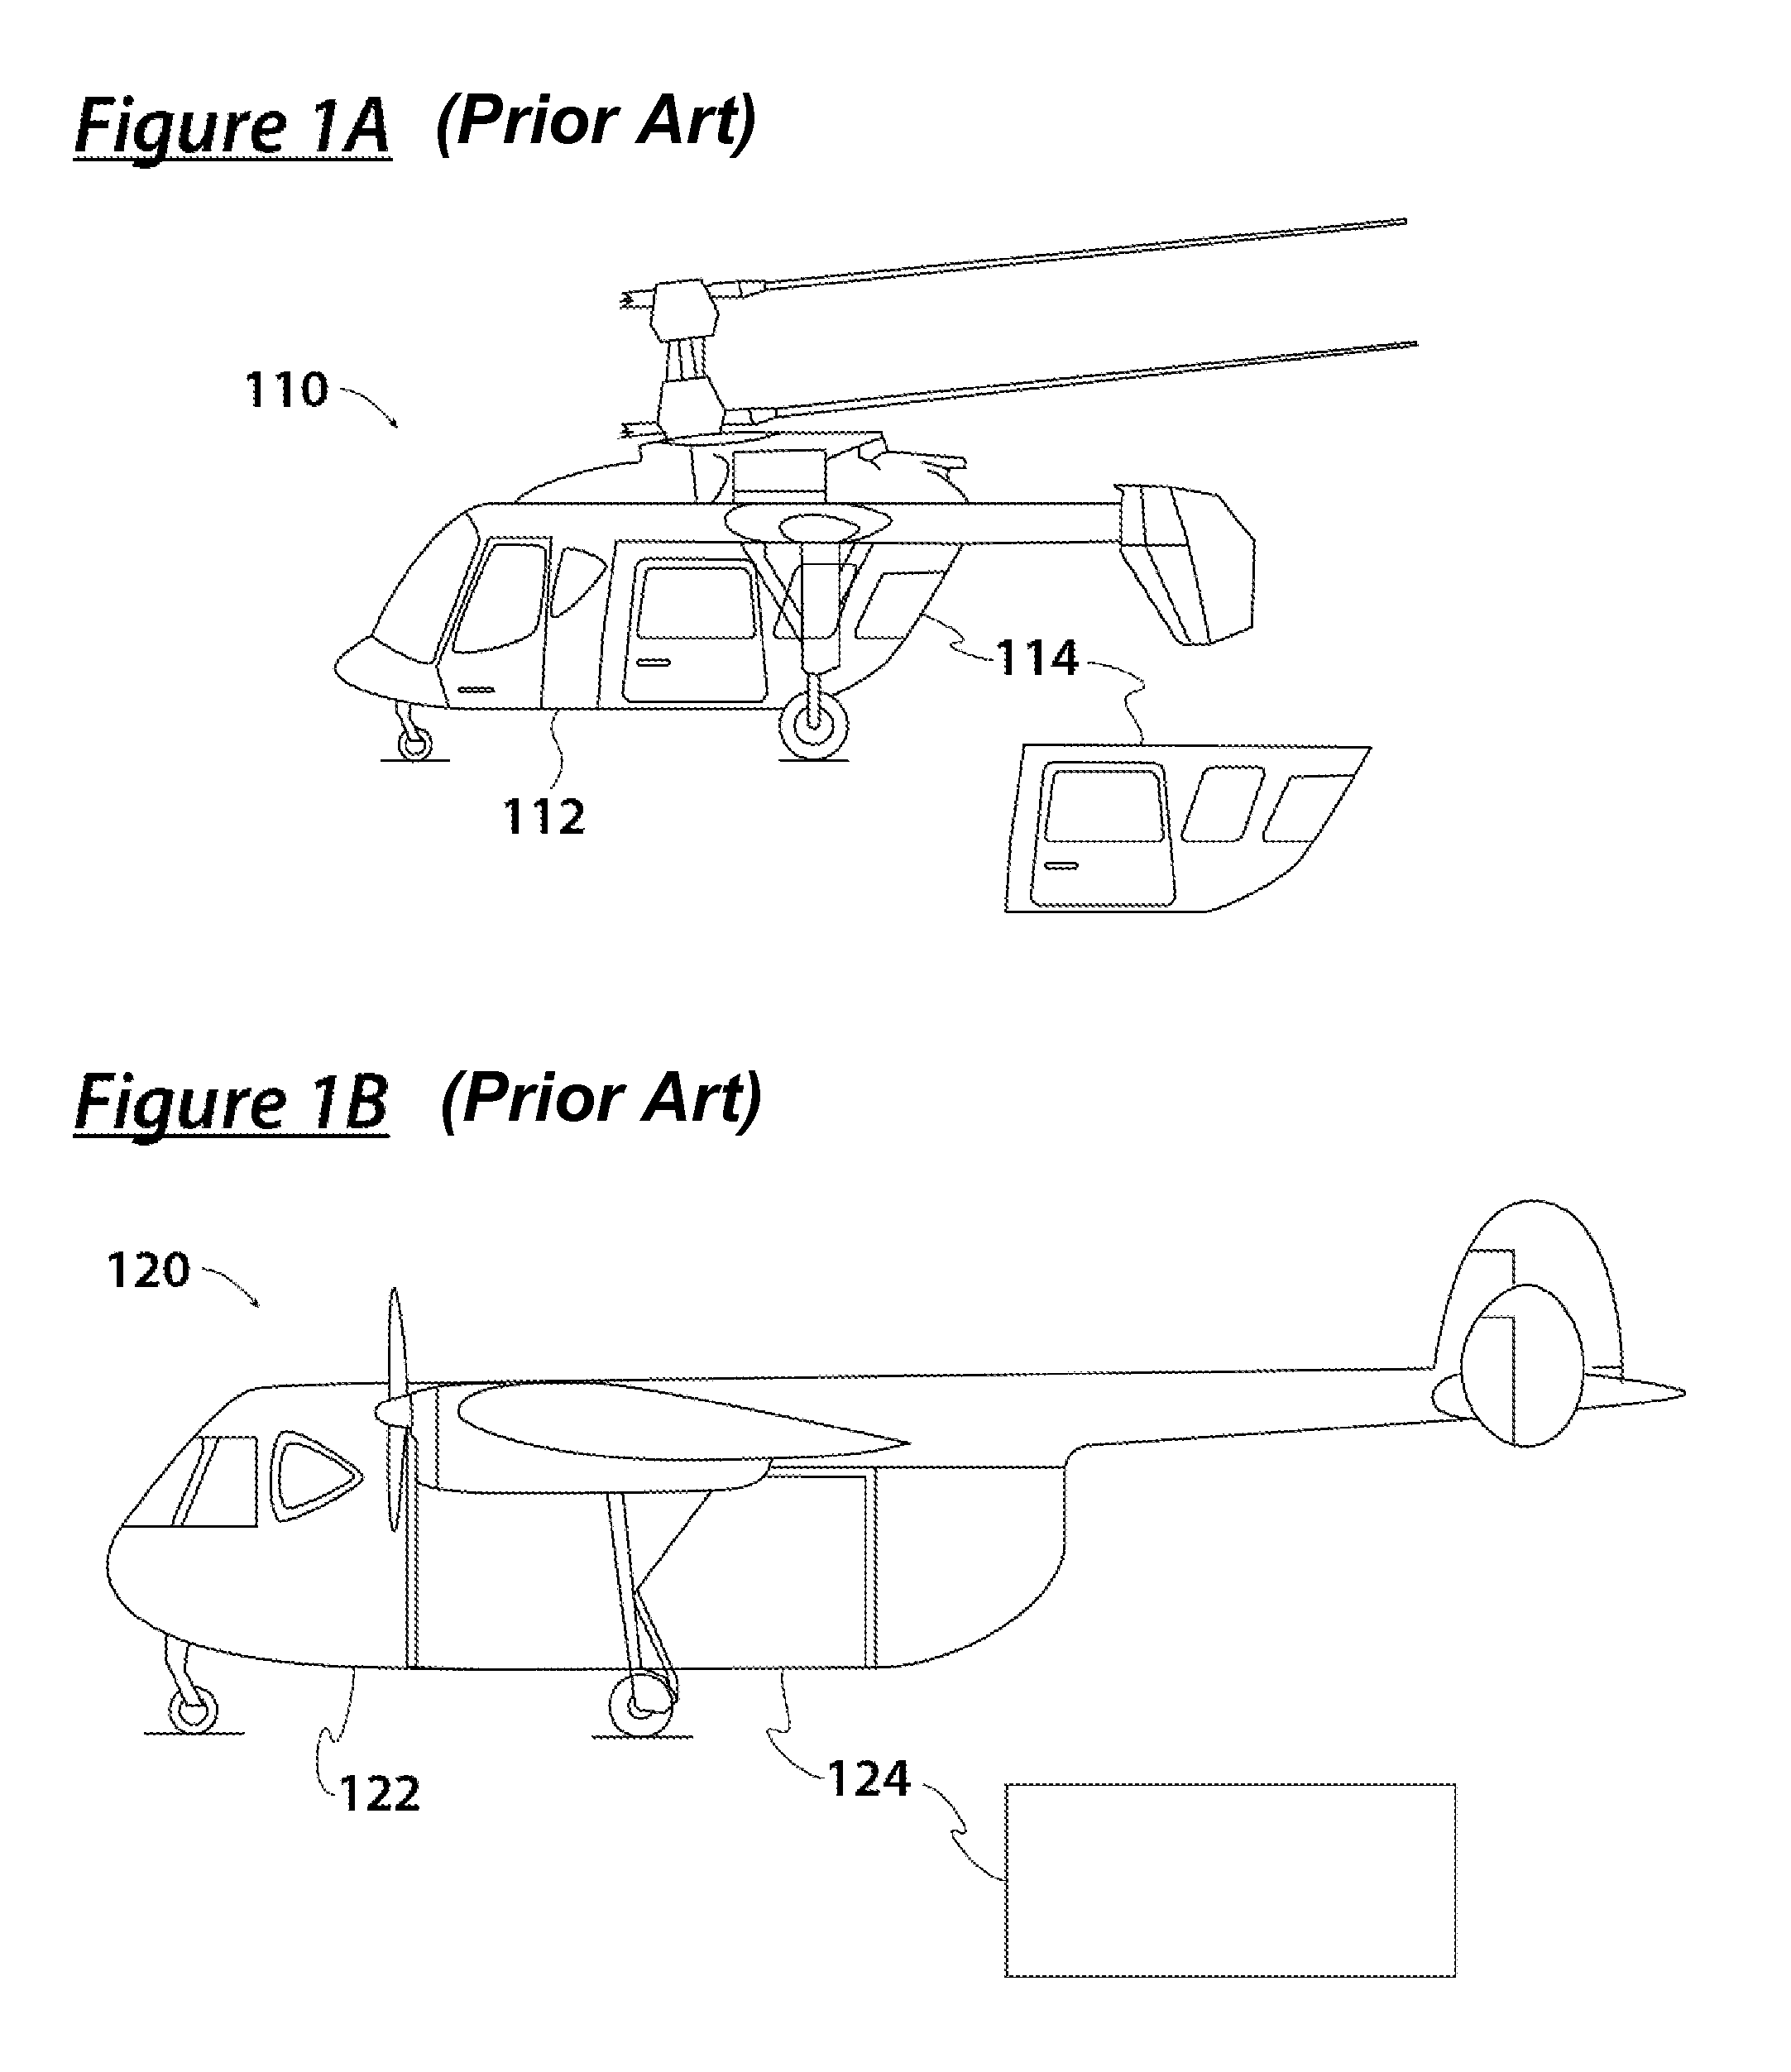 Multi-Role Aircraft with Interchangeable Mission Modules